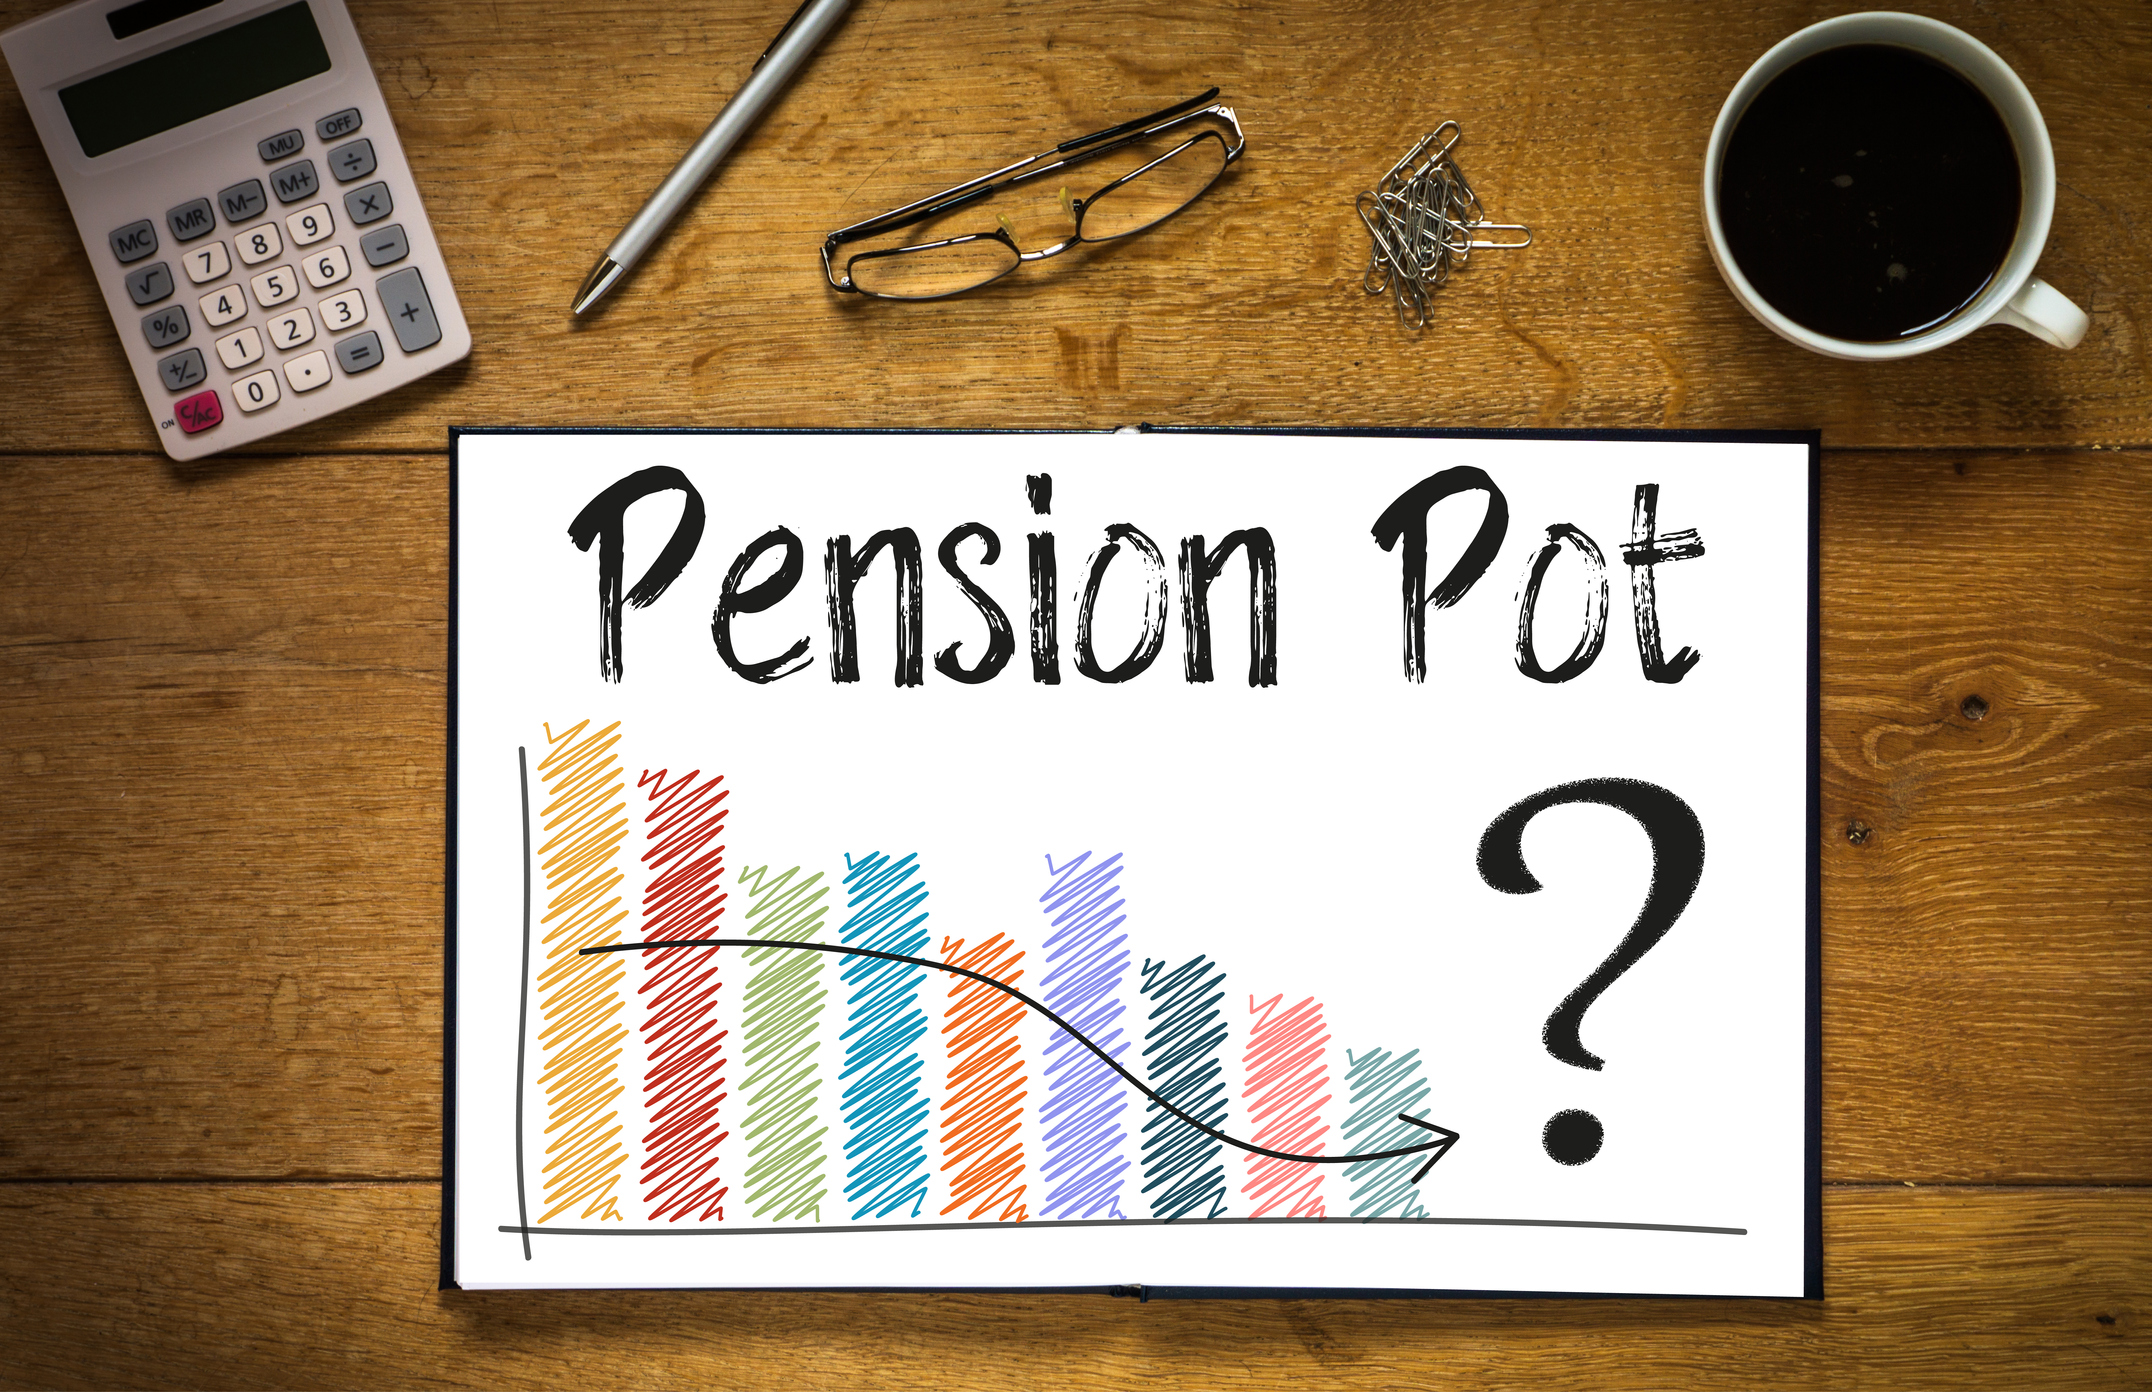 The state pension could rise by 8% in 2022